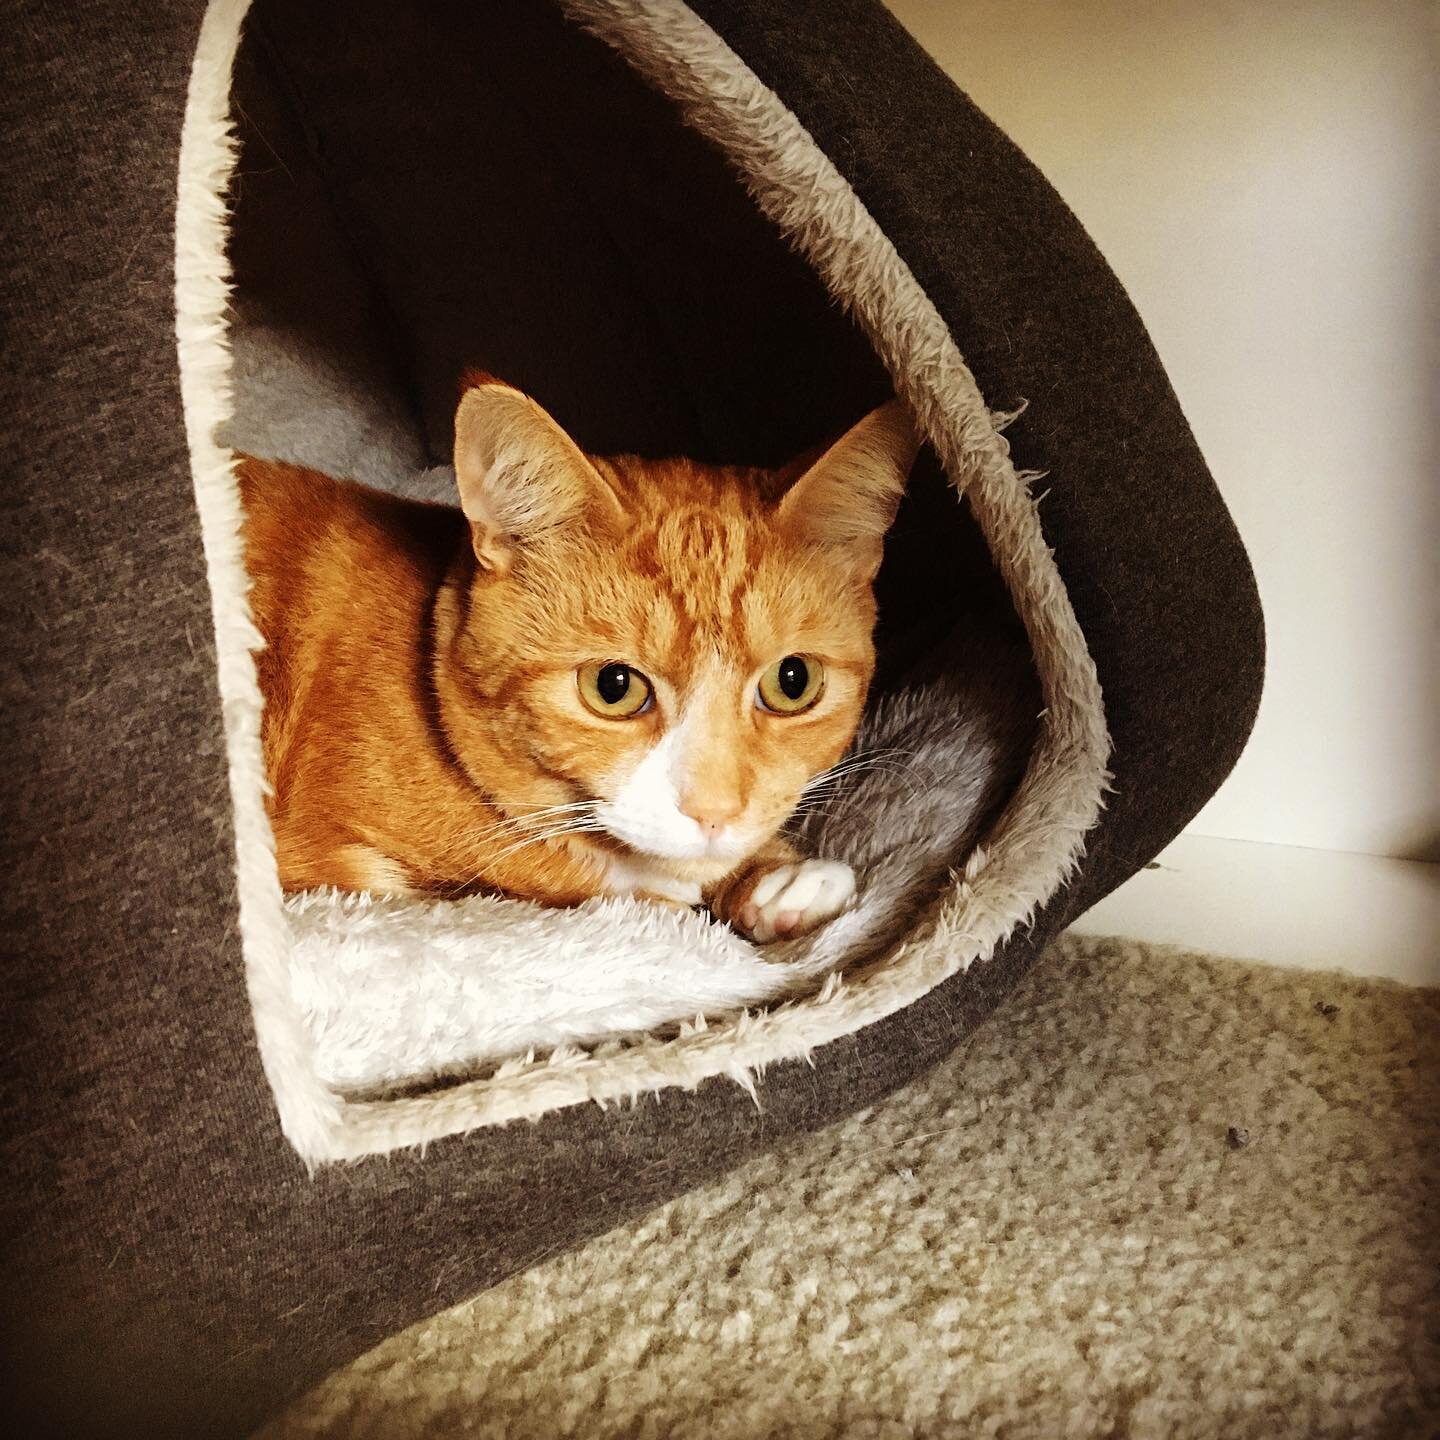 Gorgeous Snags just chillin in his igloo...

#catboarding #catsofinstagram #gingerninja #catlife #cattery #boarding